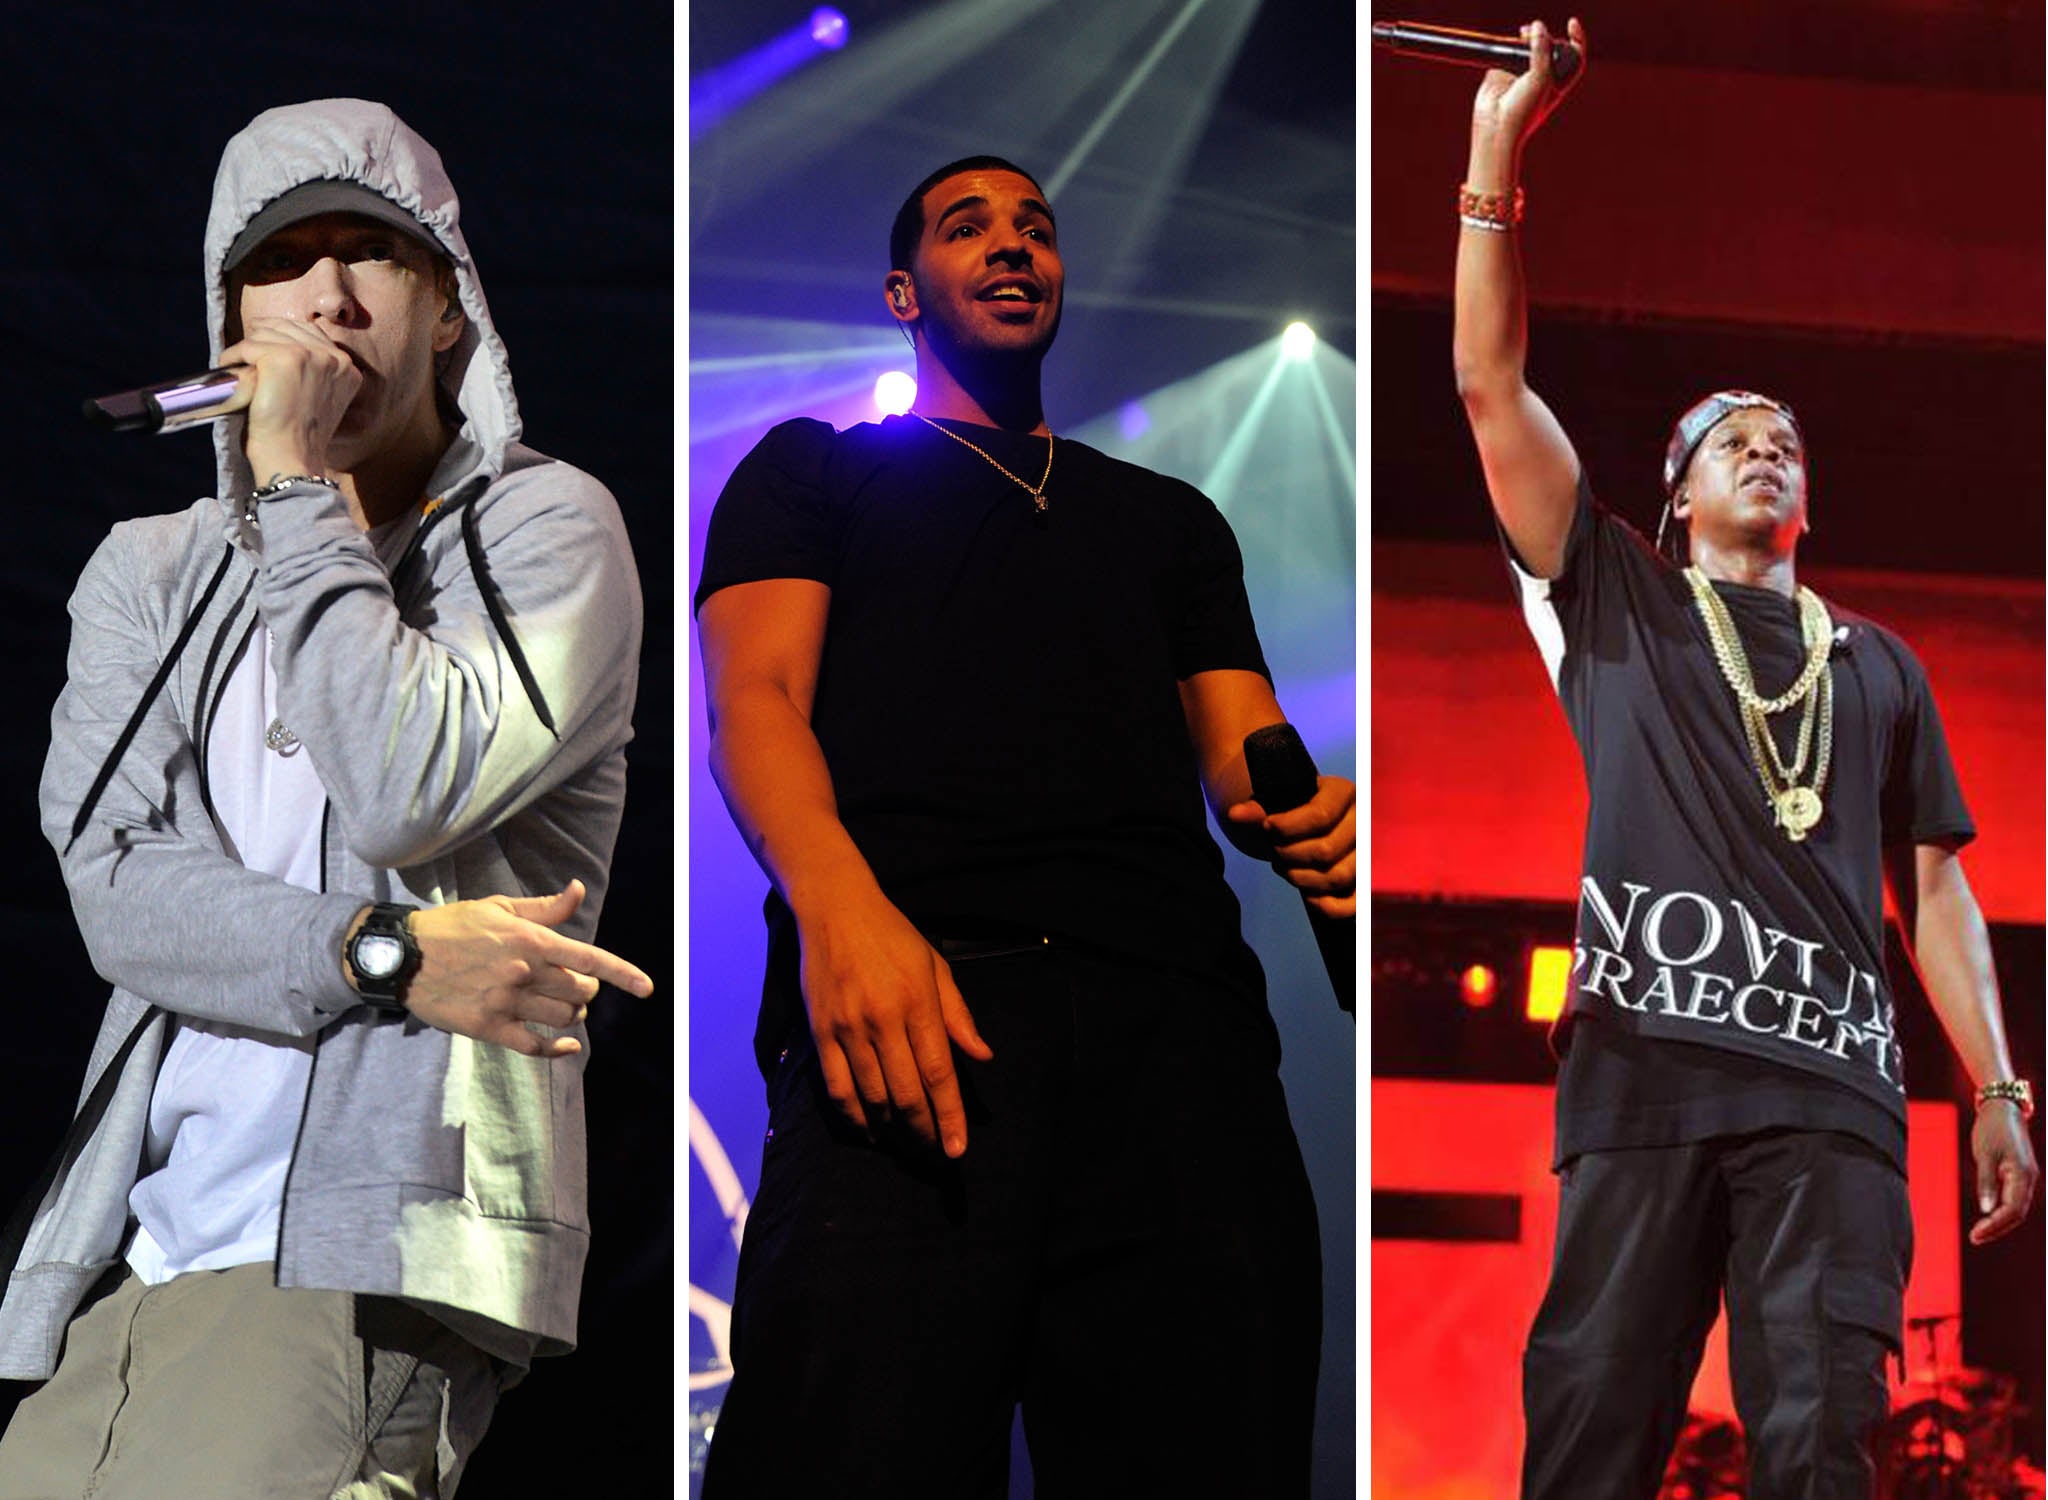 Eminem, Drake and Jay Z have joined most streamed artist Macklemore & Ryan Lewis in Spotify's 2013 hot list